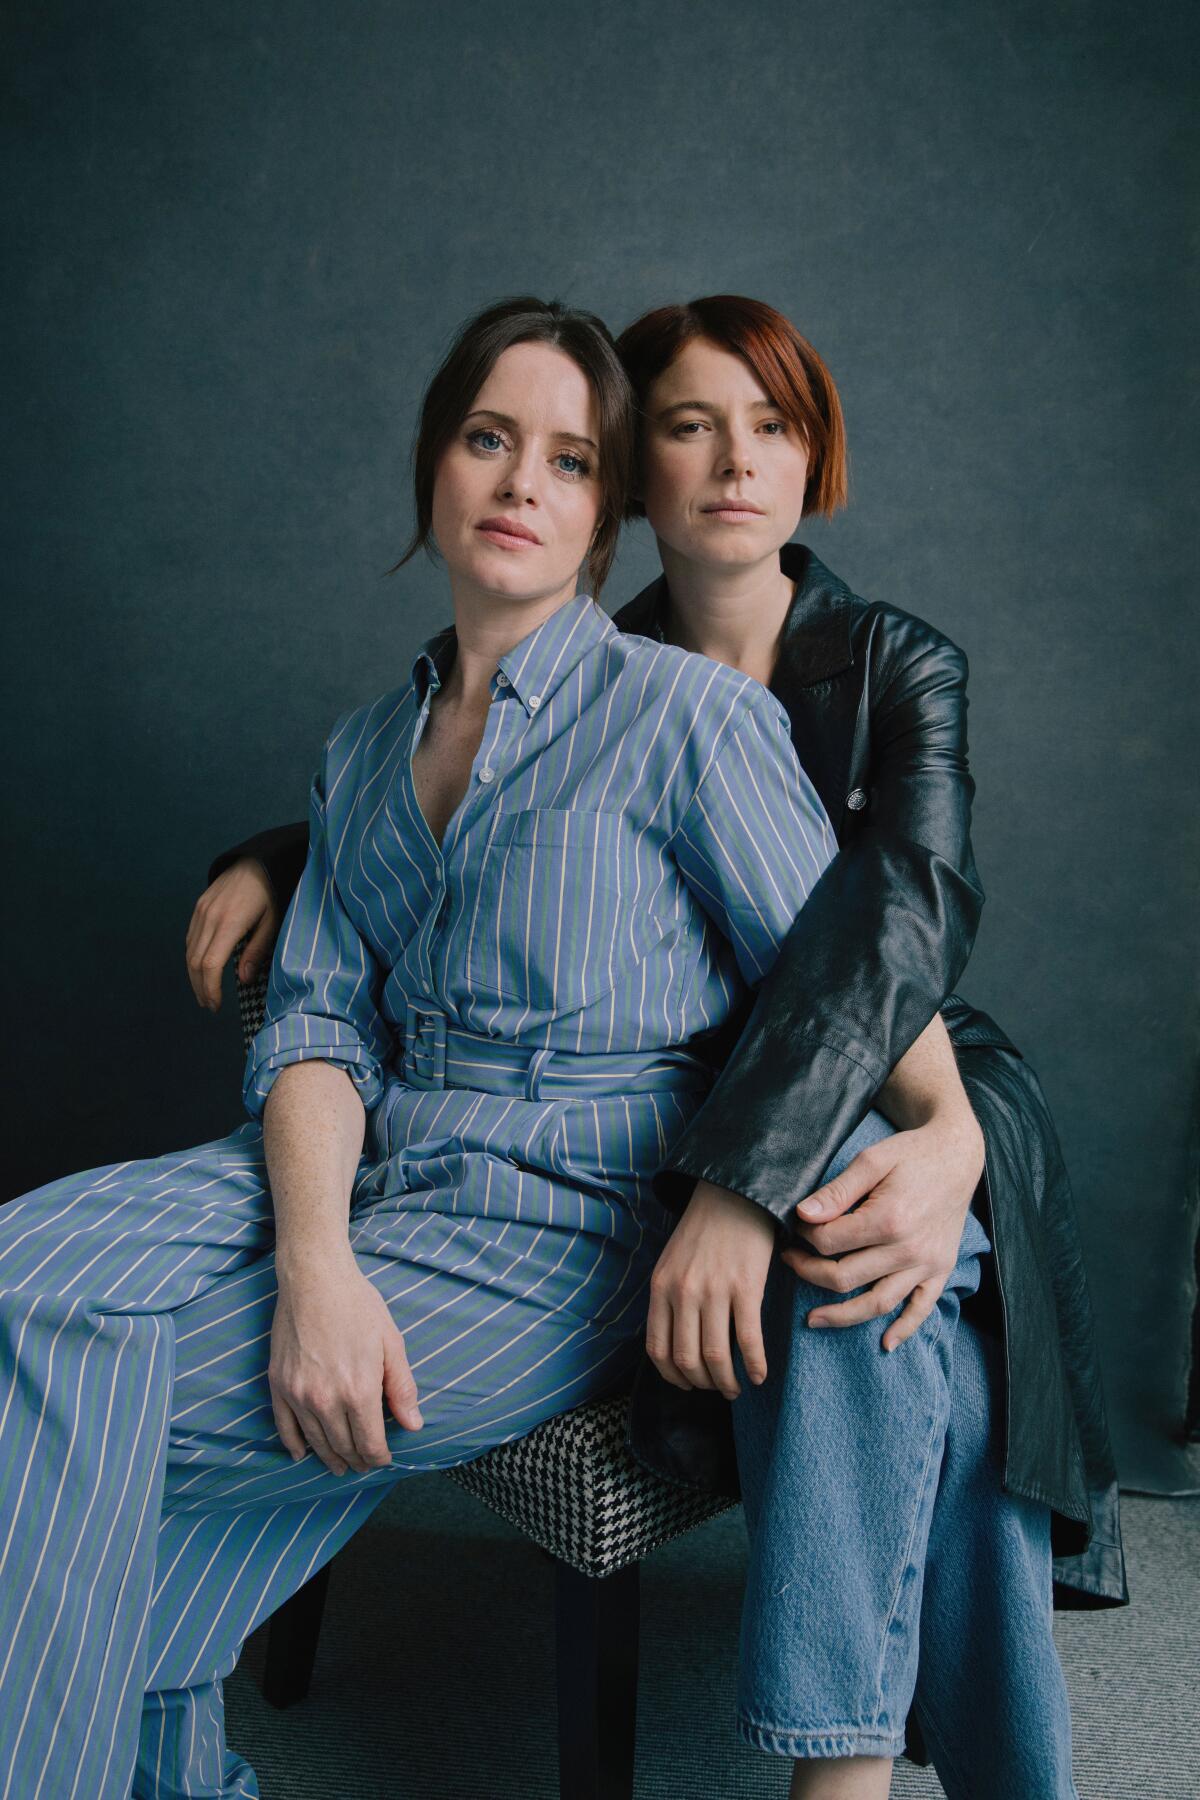 Two women sit, one behind the other, with their arms around each other